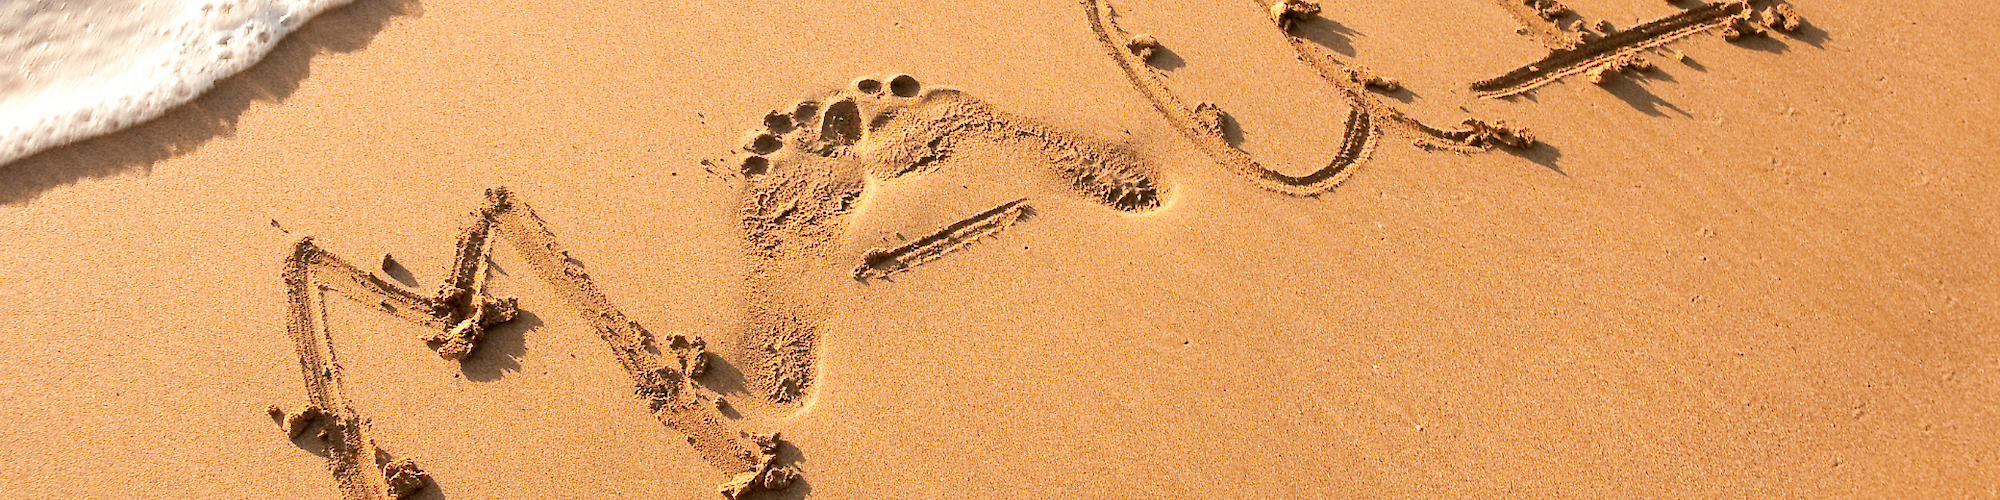 The image shows the word "MAUI" written in the sand on a beach with waves approaching the text.